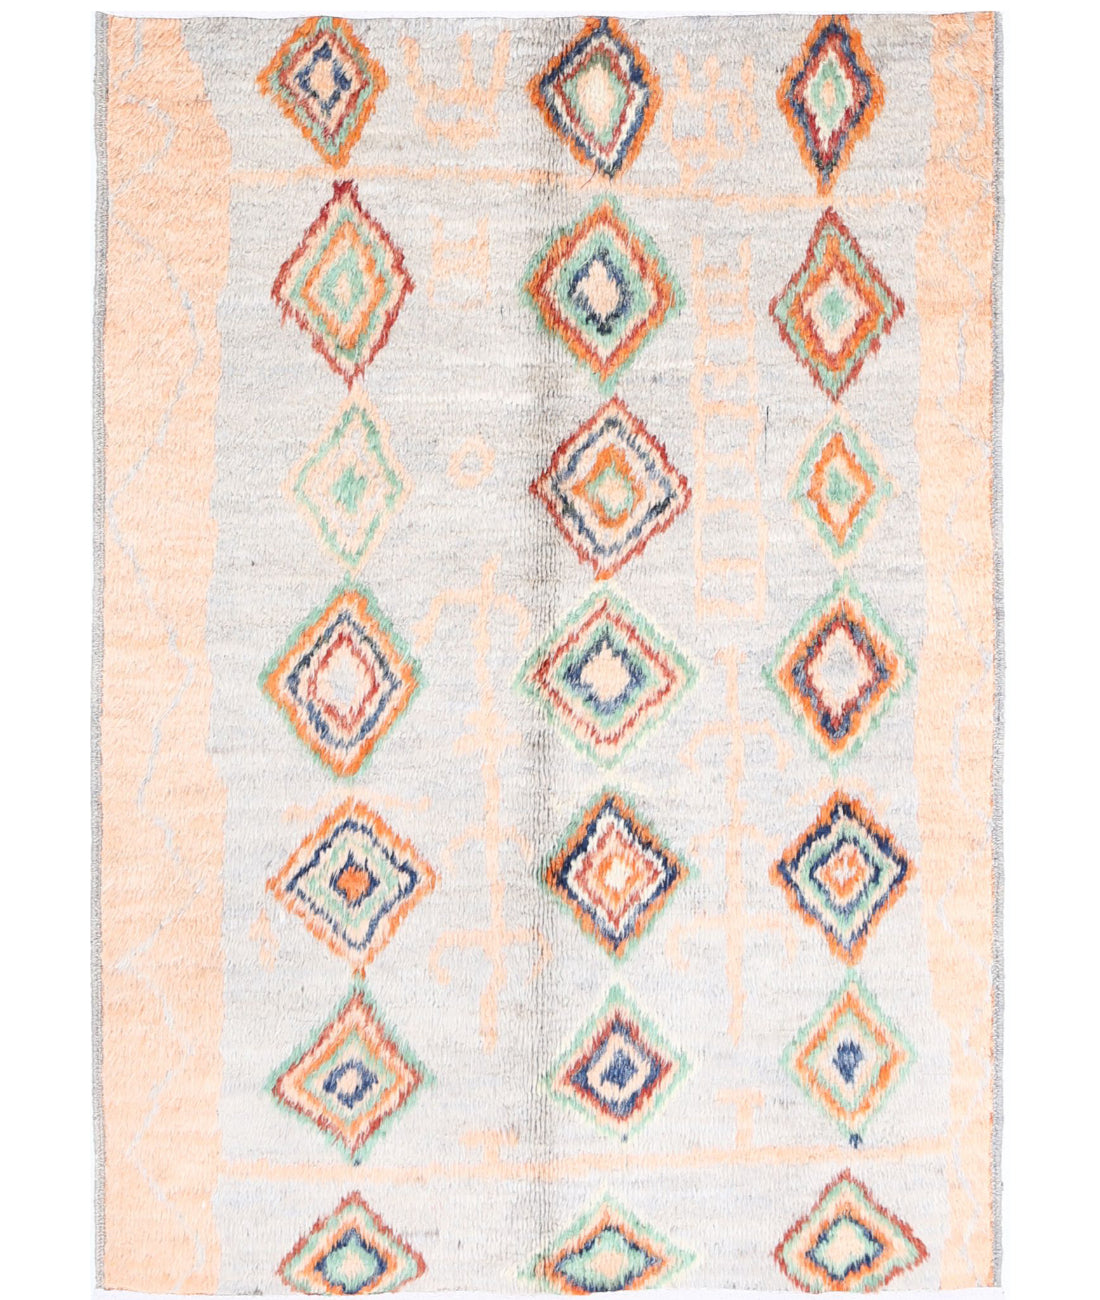 Hand Knotted Tribal Moroccan Wool Rug - 4&#39;2&#39;&#39; x 5&#39;9&#39;&#39; 4&#39;2&#39;&#39; x 5&#39;9&#39;&#39; (125 X 173) / Blue / Brown